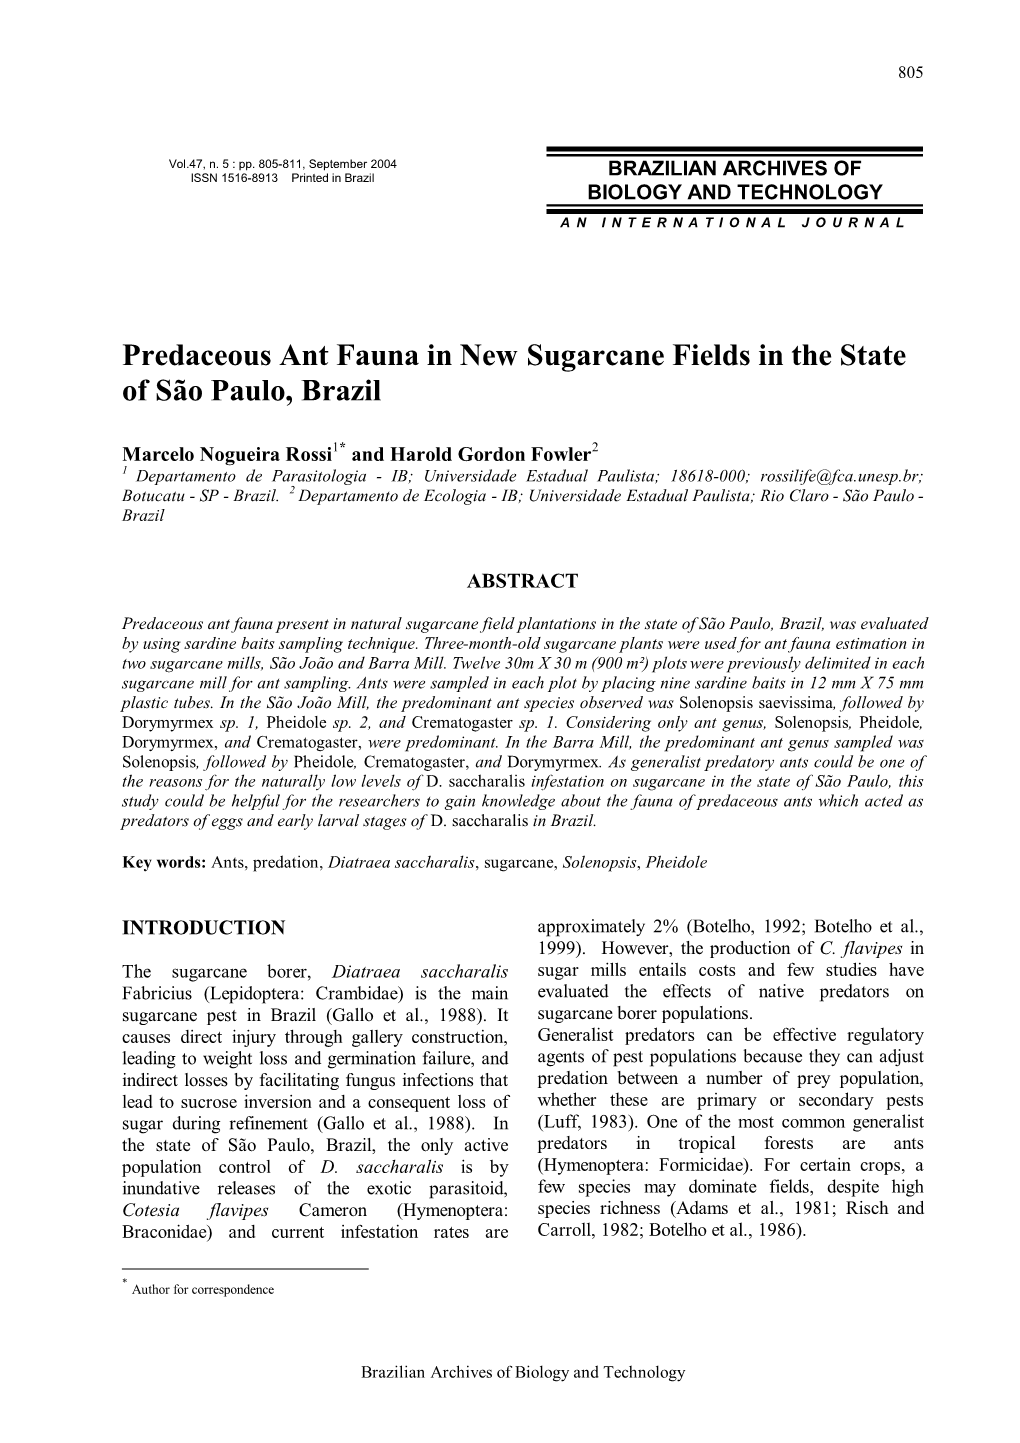 Predaceous Ant Fauna in New Sugarcane Fields in the State of São Paulo, Brazil